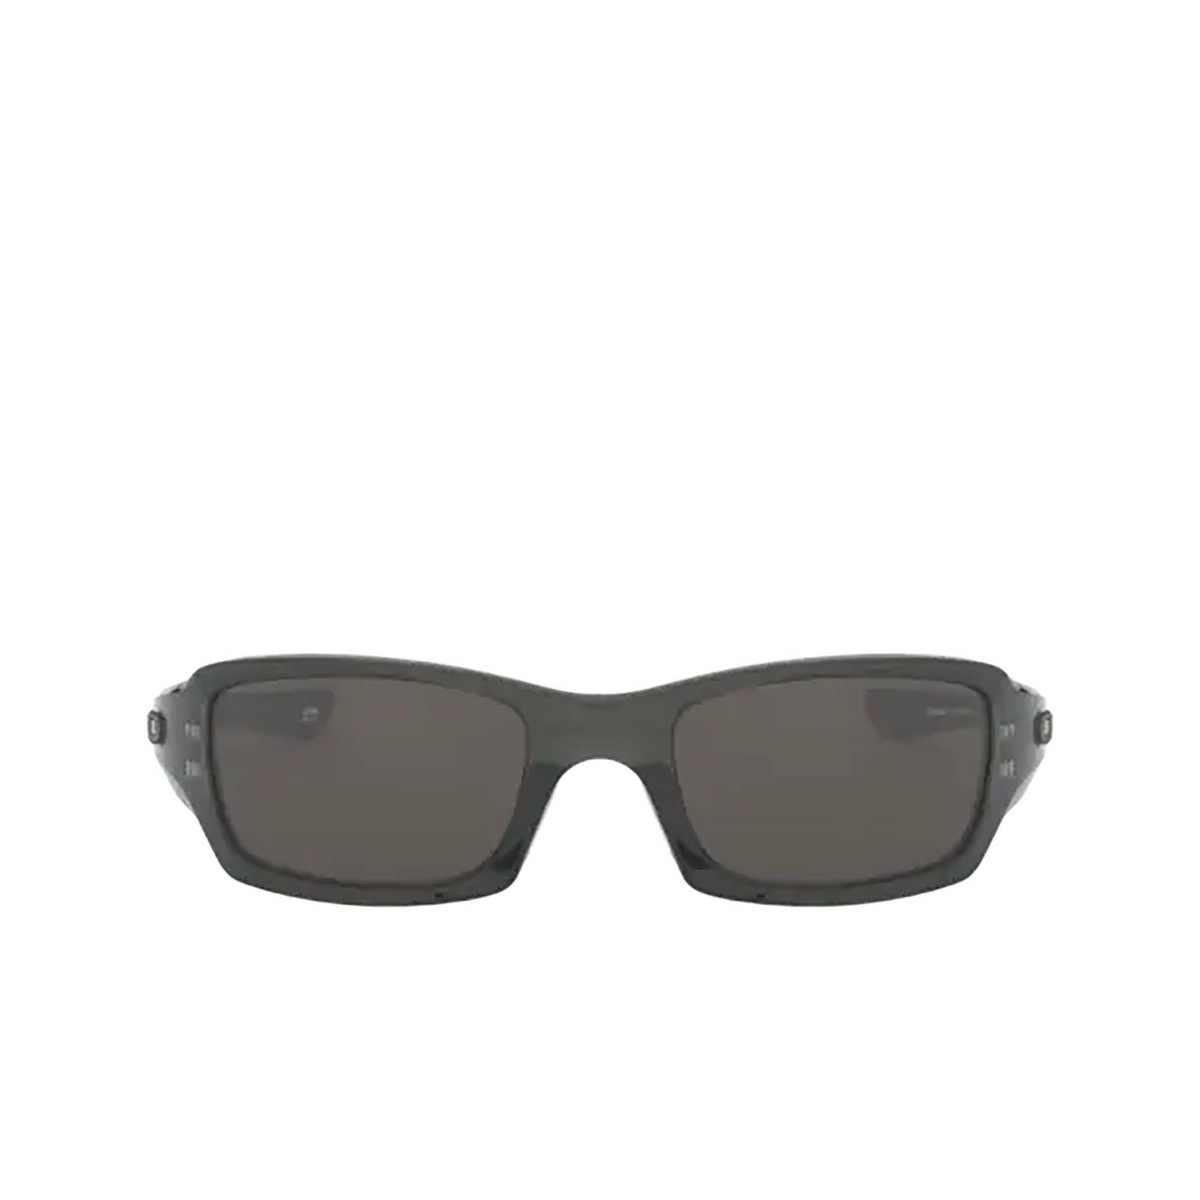 Oakley FIVES SQUARED Sunglasses 923805 Grey Smoke - front view